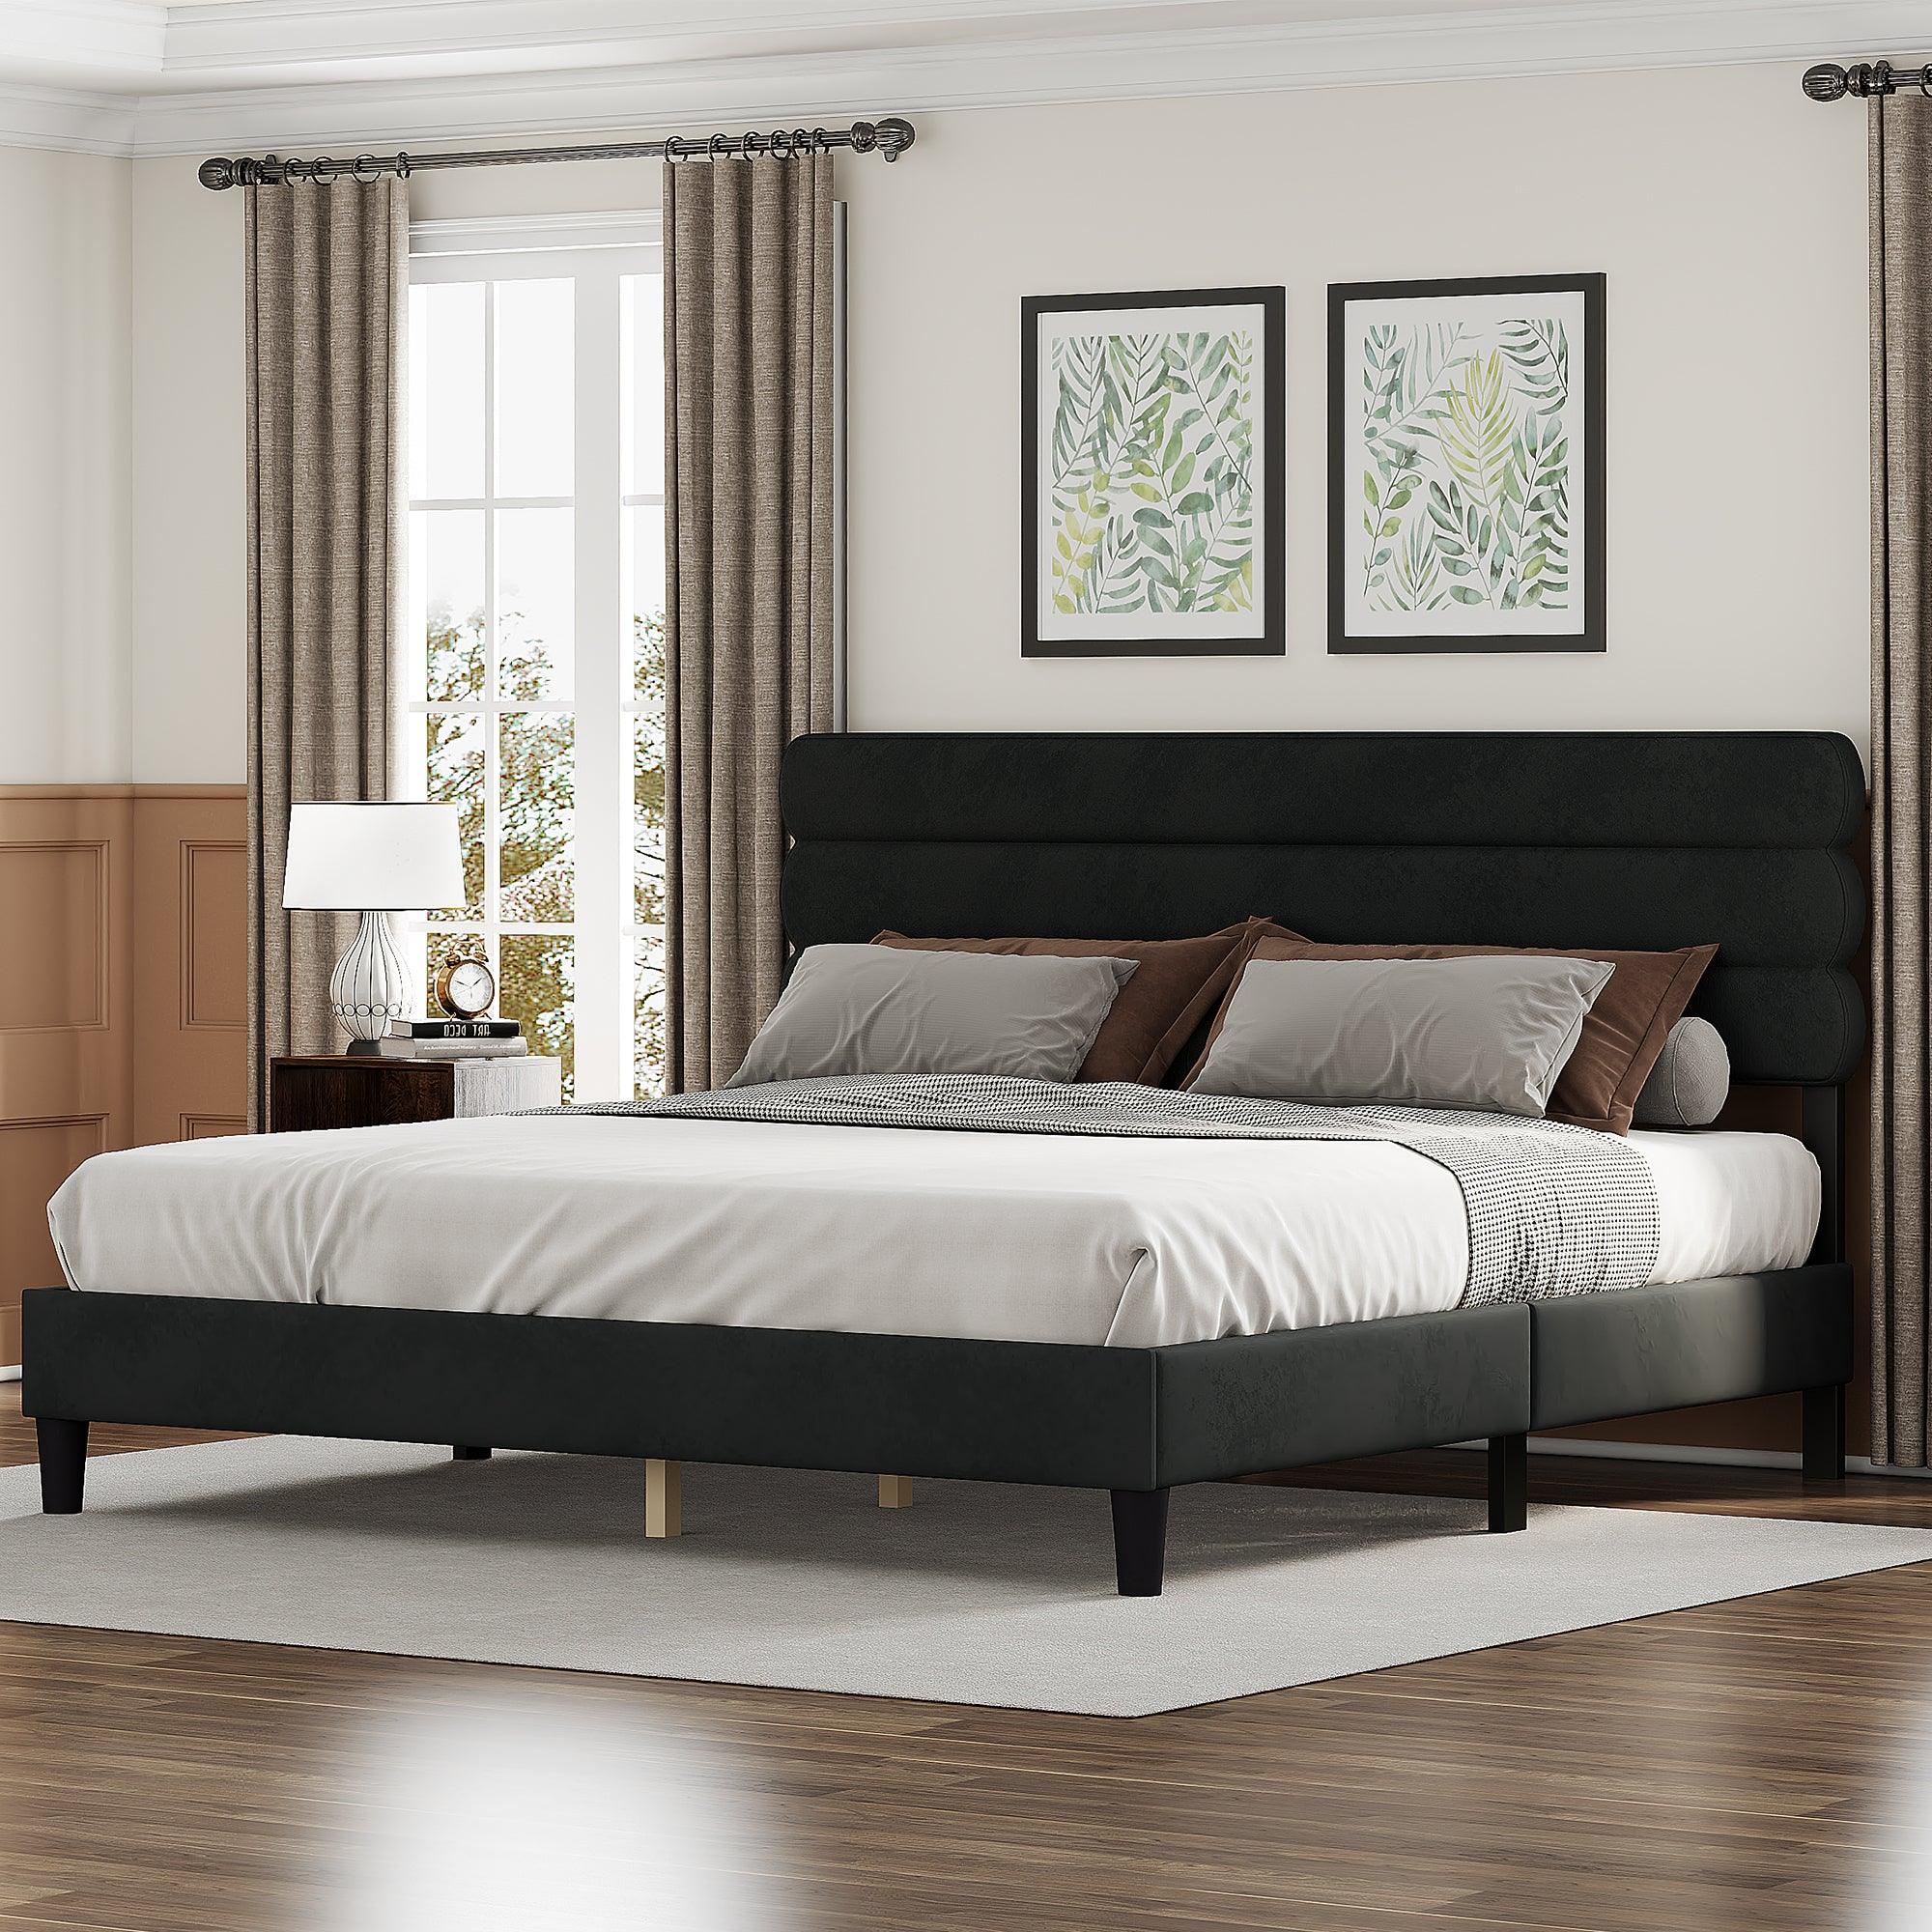 🆓🚛 King Bed Frame With Headboard, Sturdy Platform Bed With Wooden Slats Support, Dark Gray